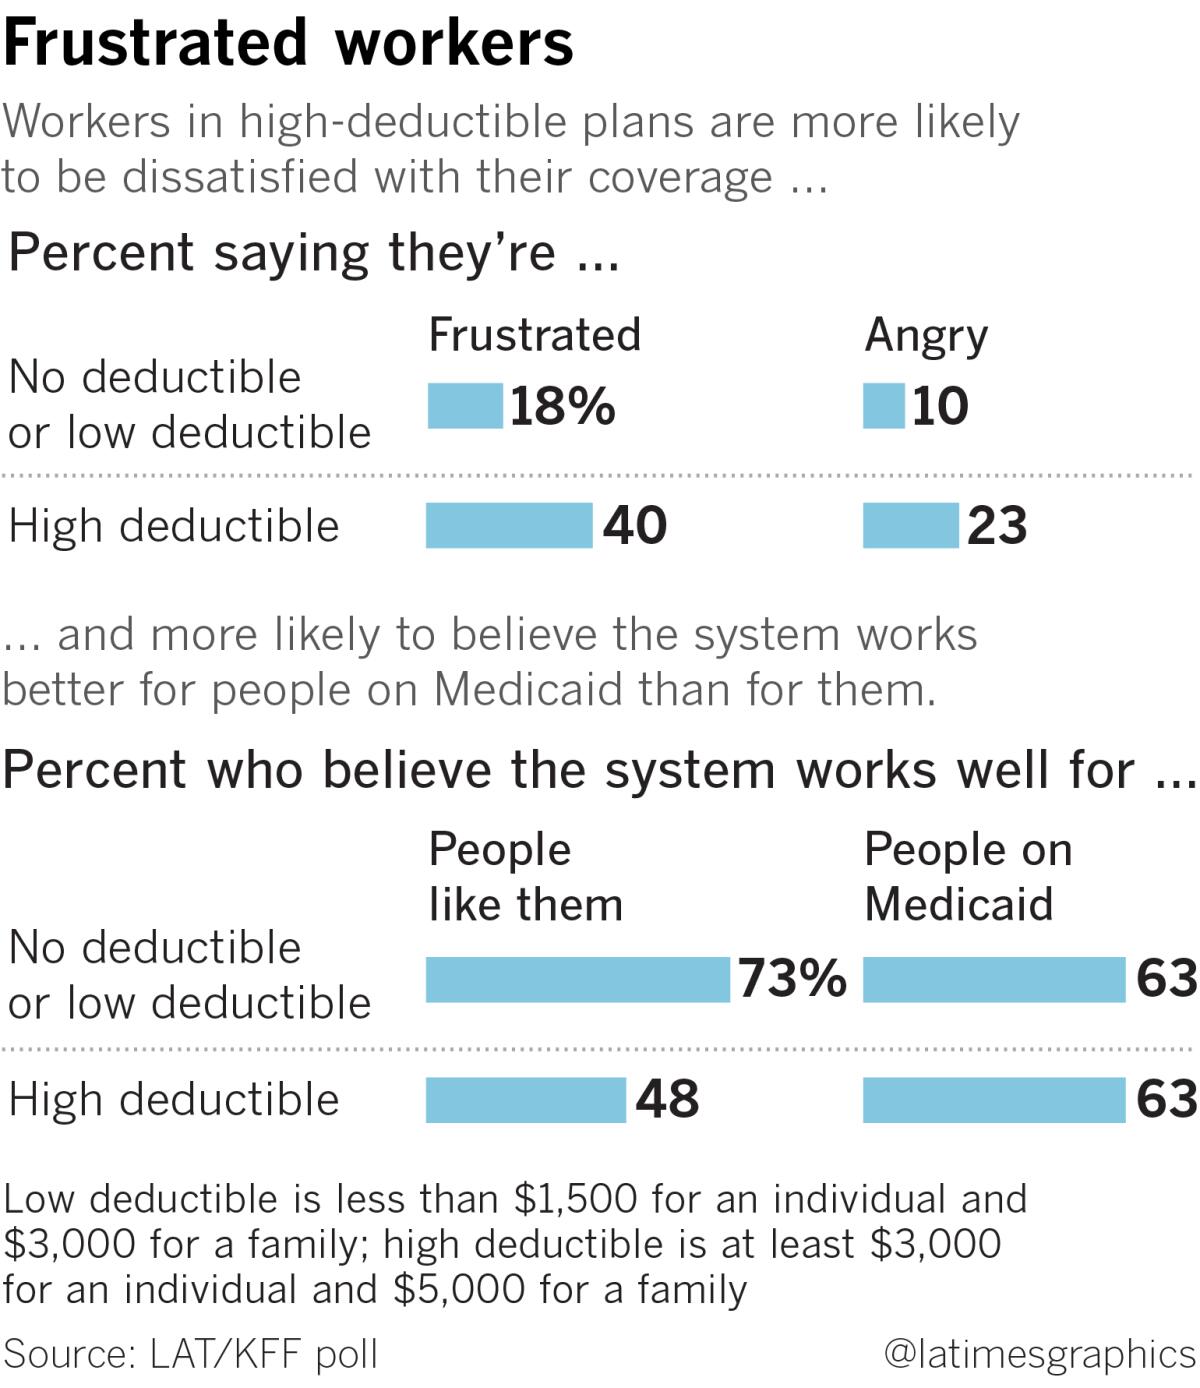 A chart showing how workers are frustrated by high deductibles.